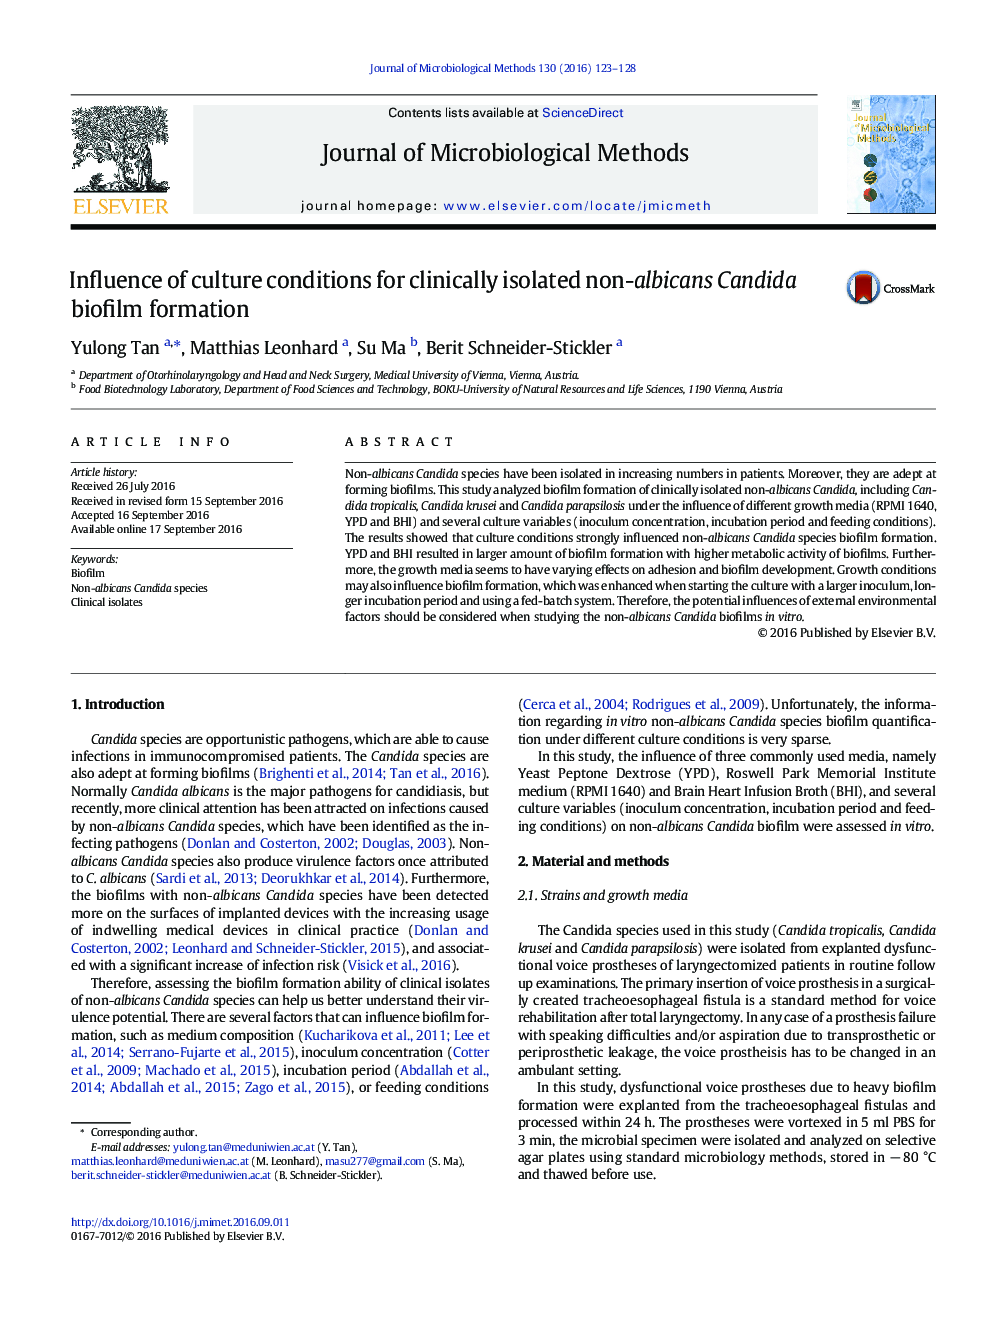 Influence of culture conditions for clinically isolated non-albicans Candida biofilm formation